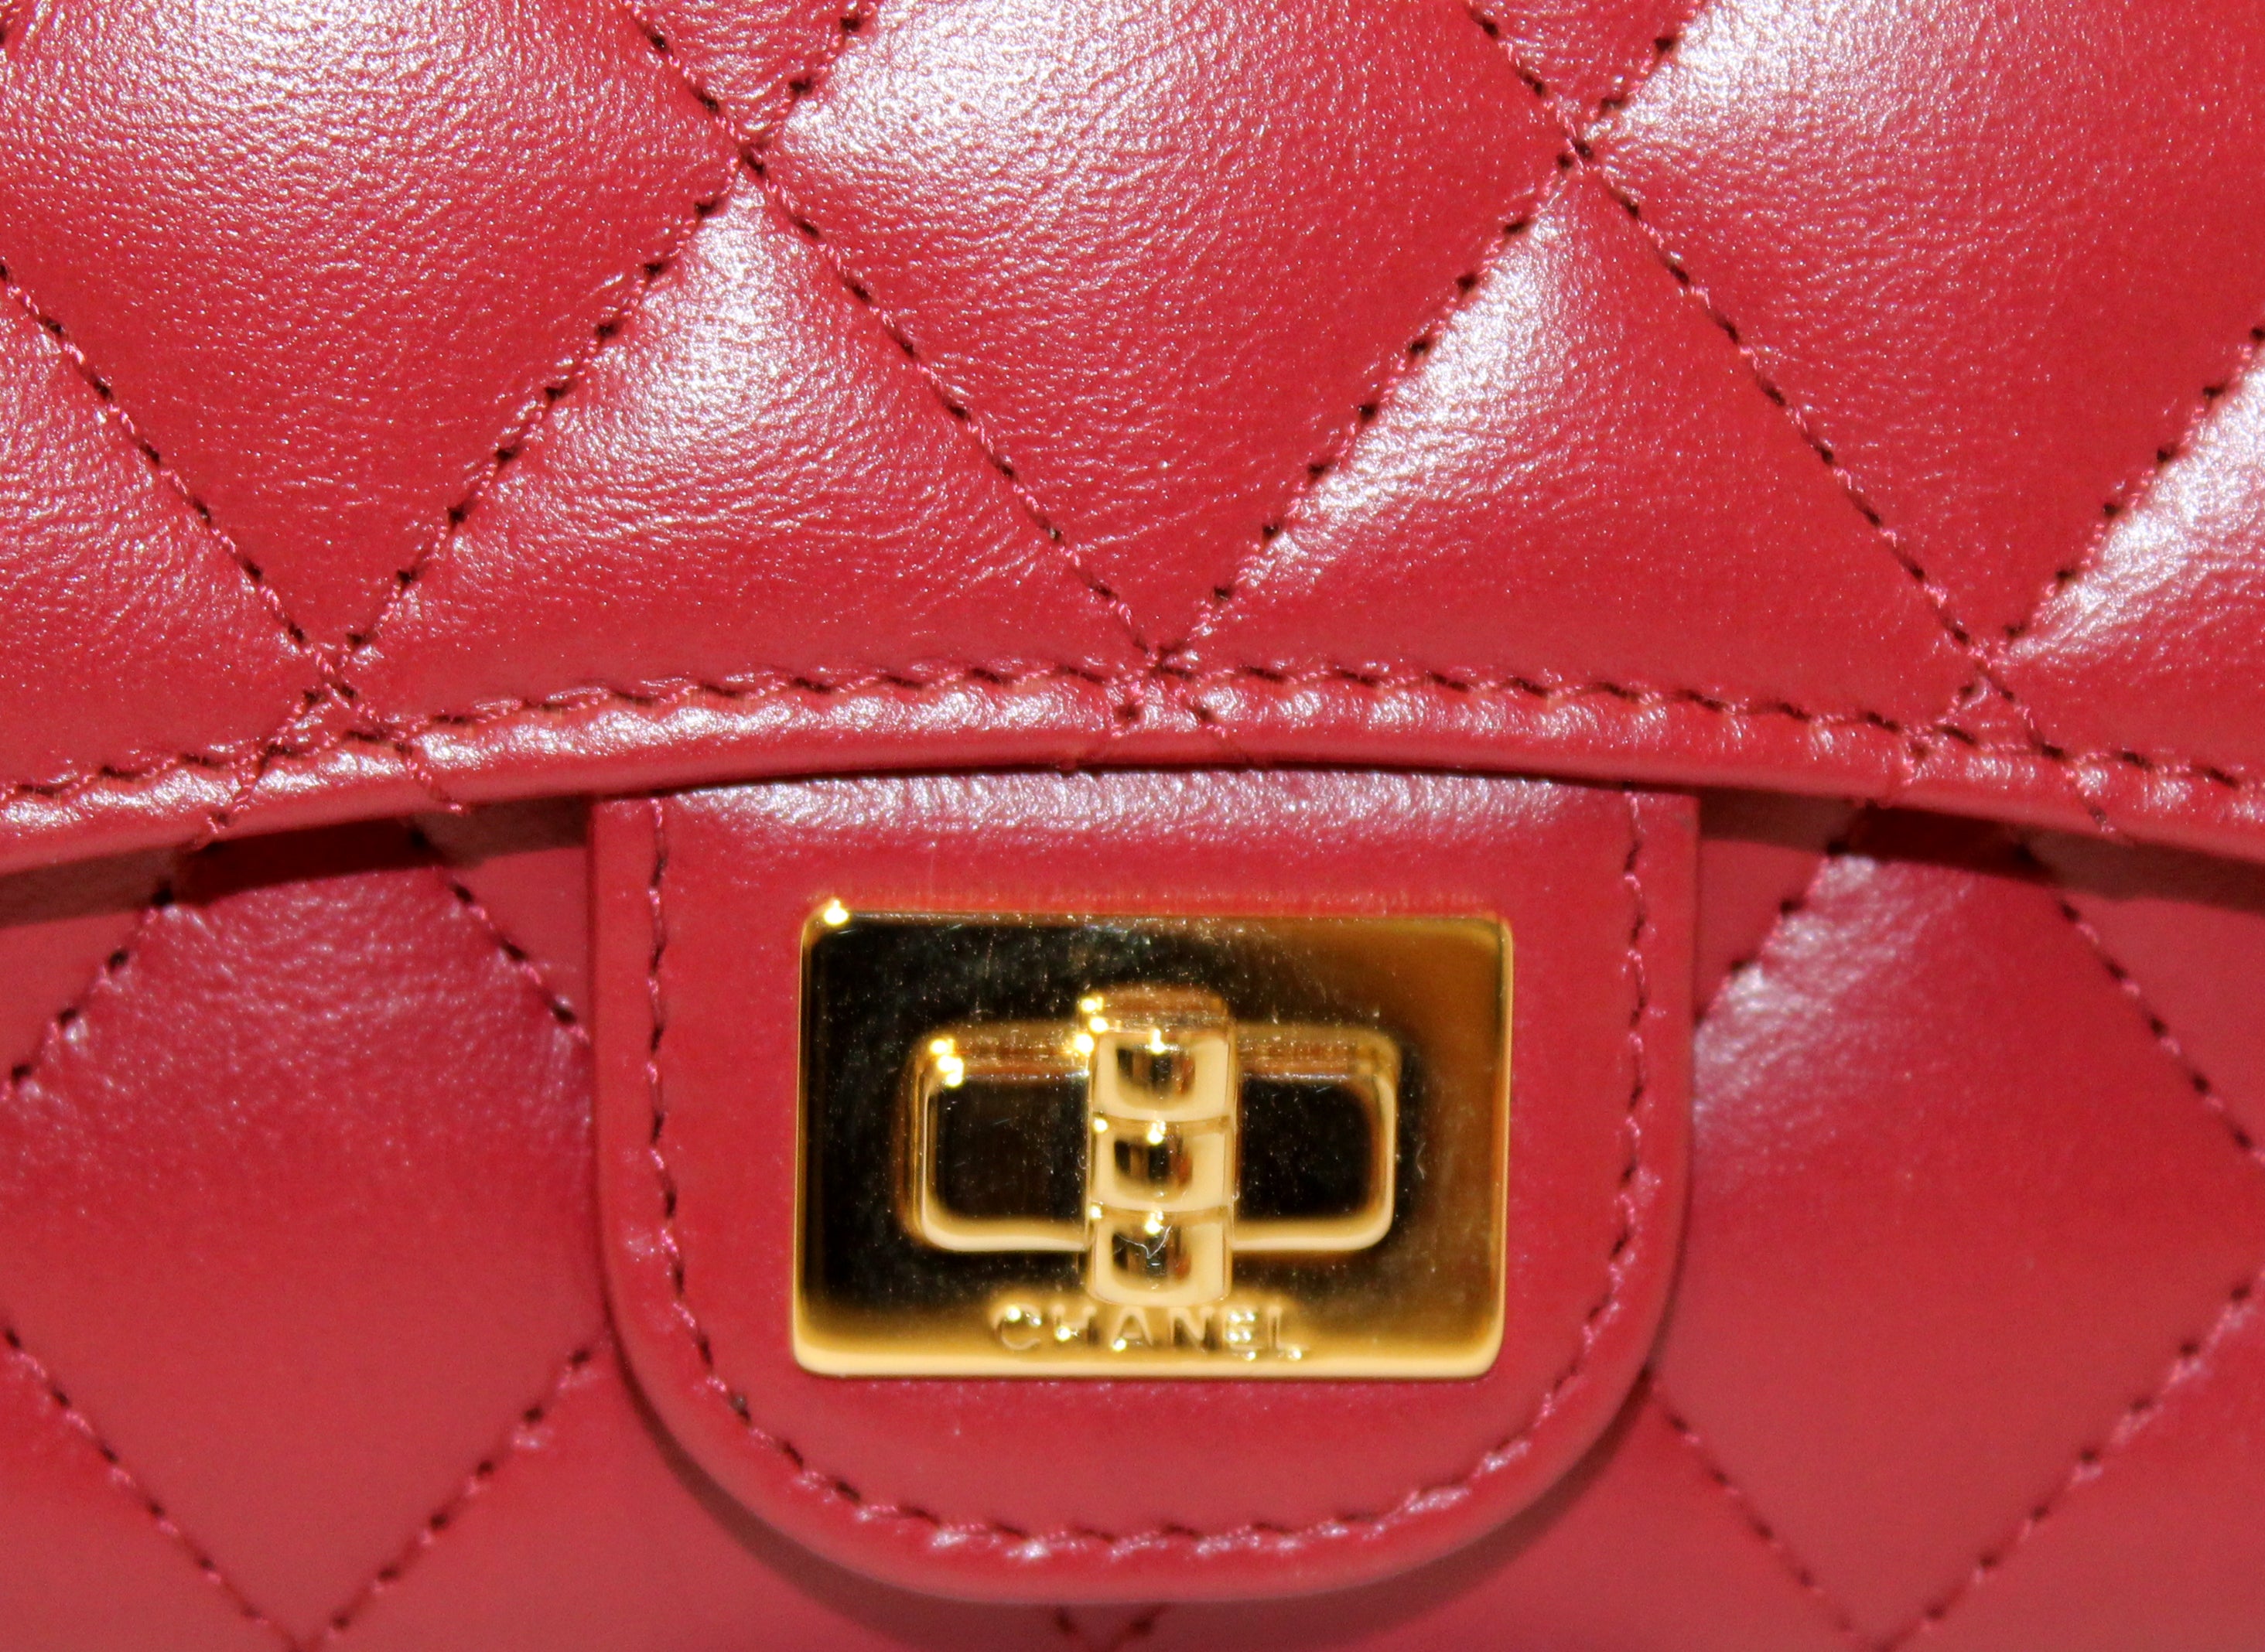 CHANEL Red Patent Leather Wallets for Women for sale